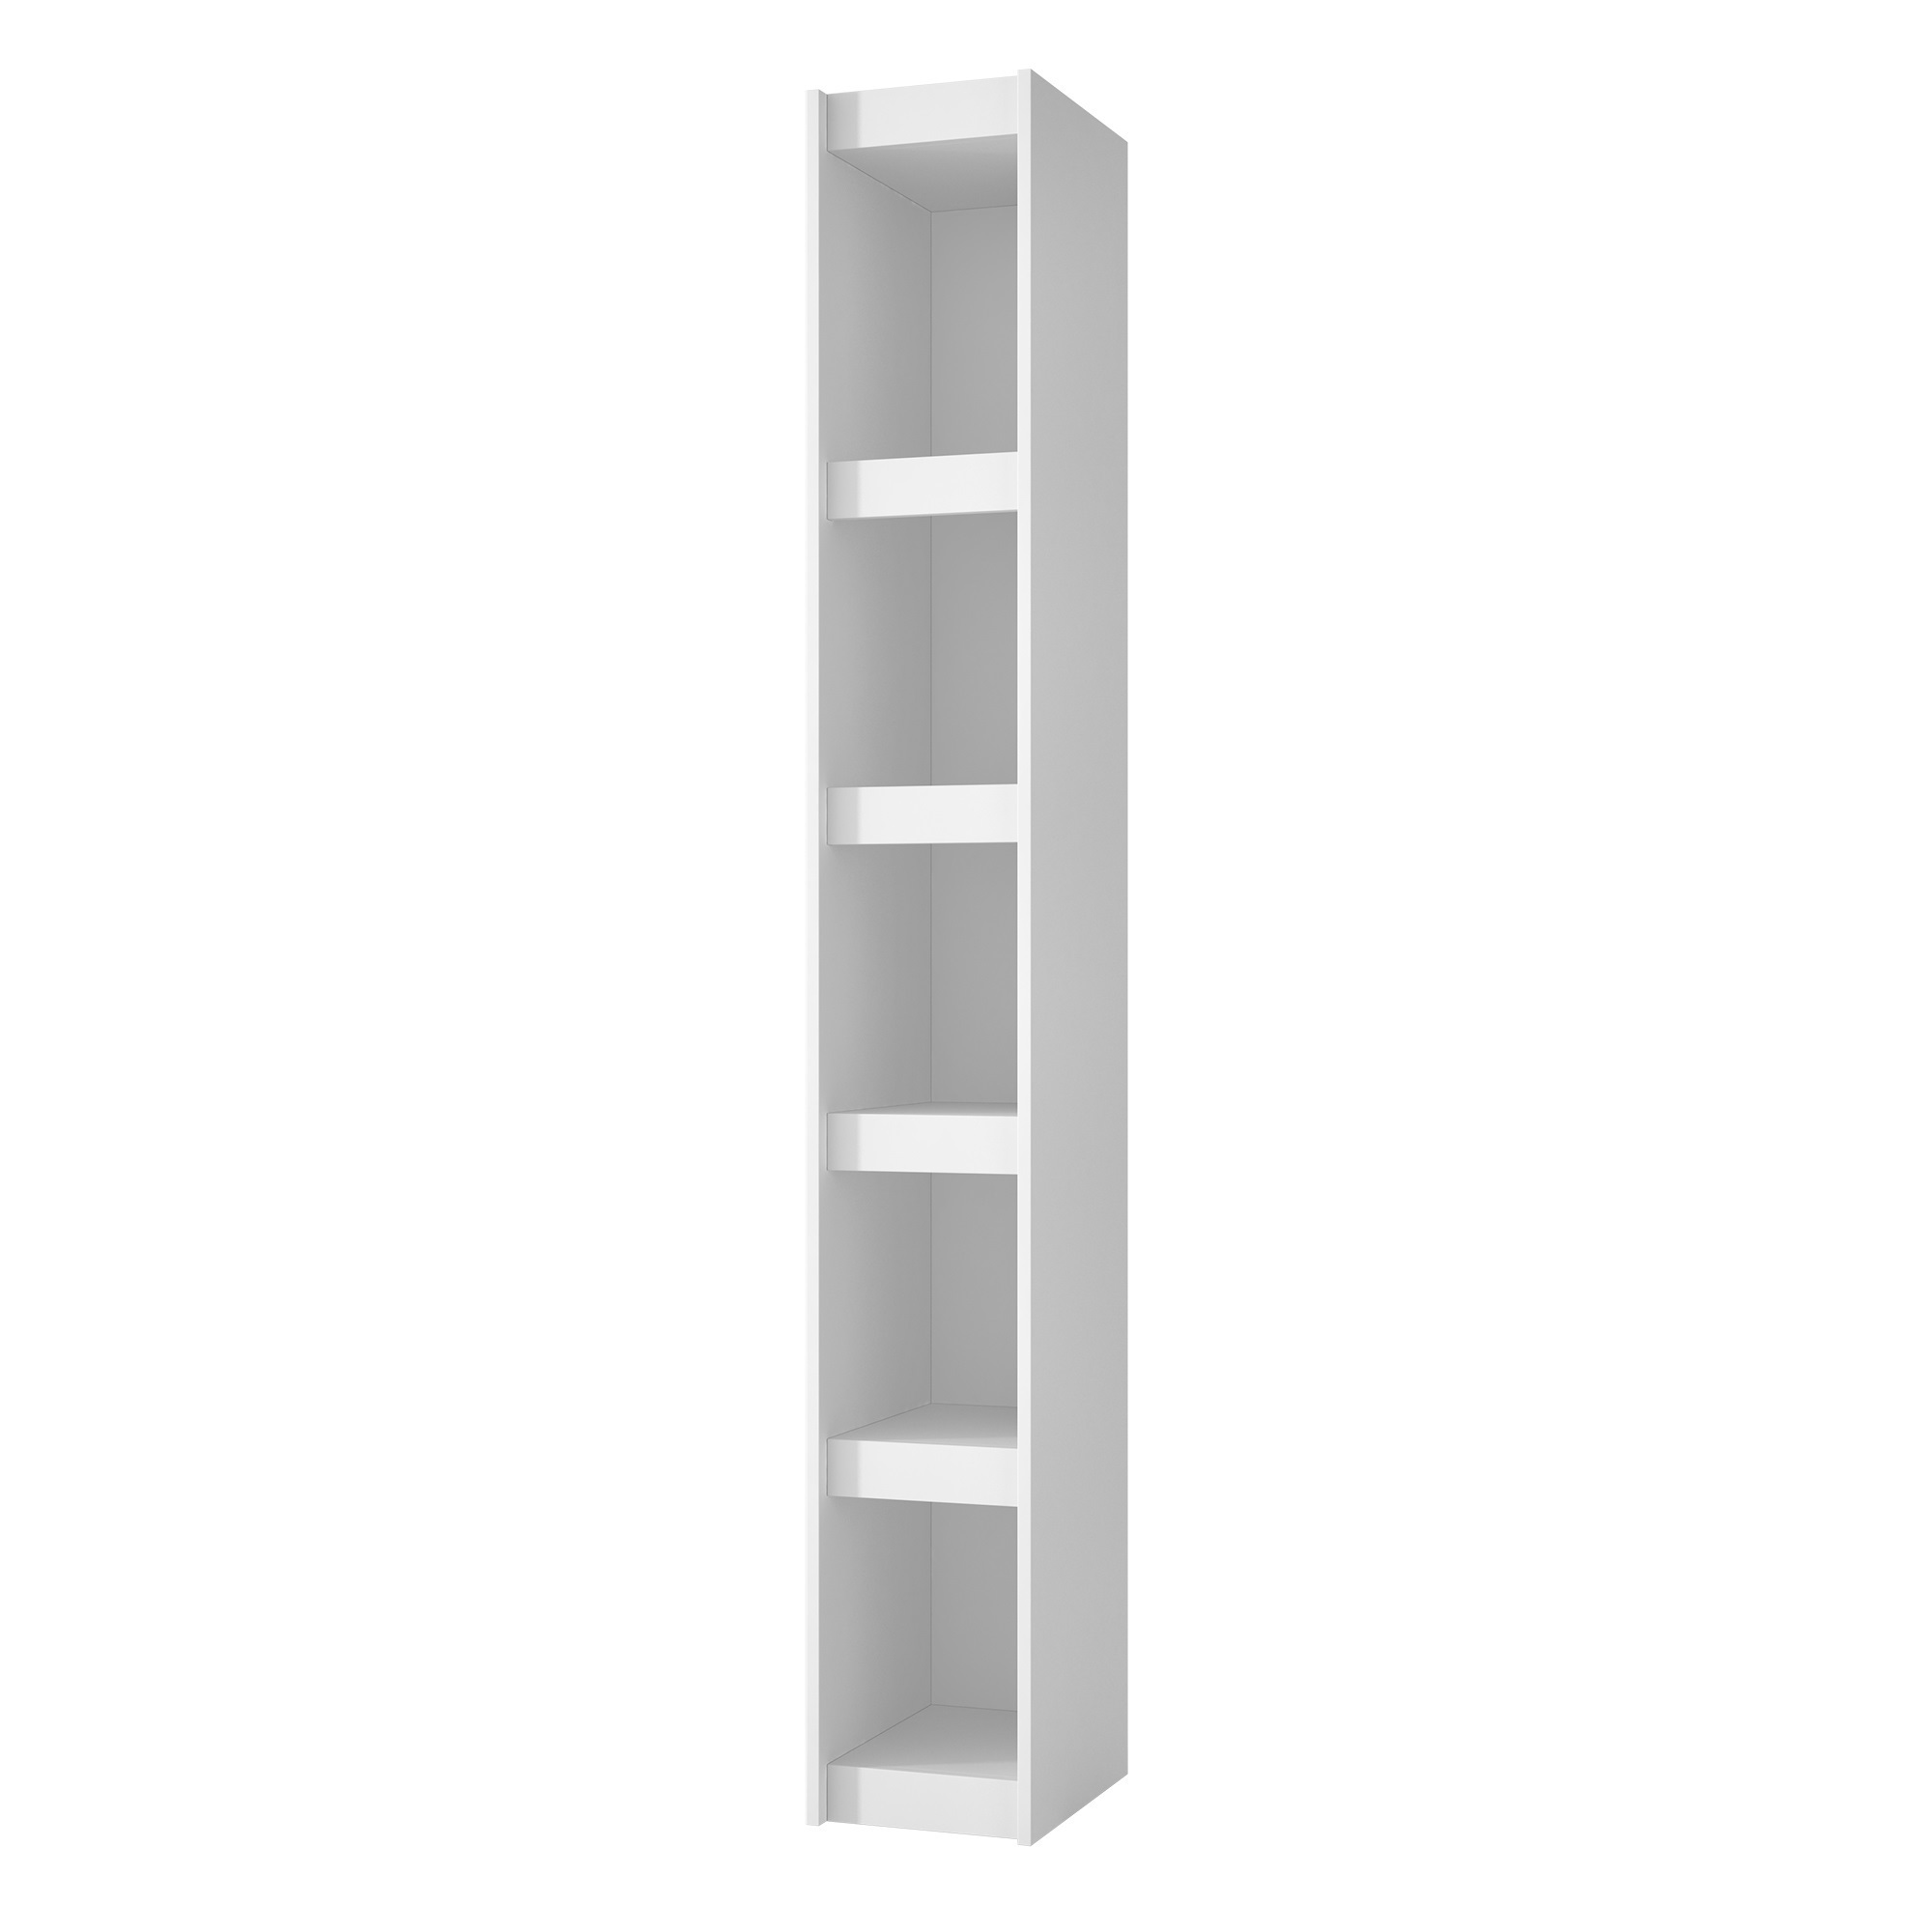 Manhattan Comfort, Parana Bookcase 1.0 with 5 shelves in White, Height 71.65 in, Shelves (qty.) 5 Material Melamine, Model 30AMC